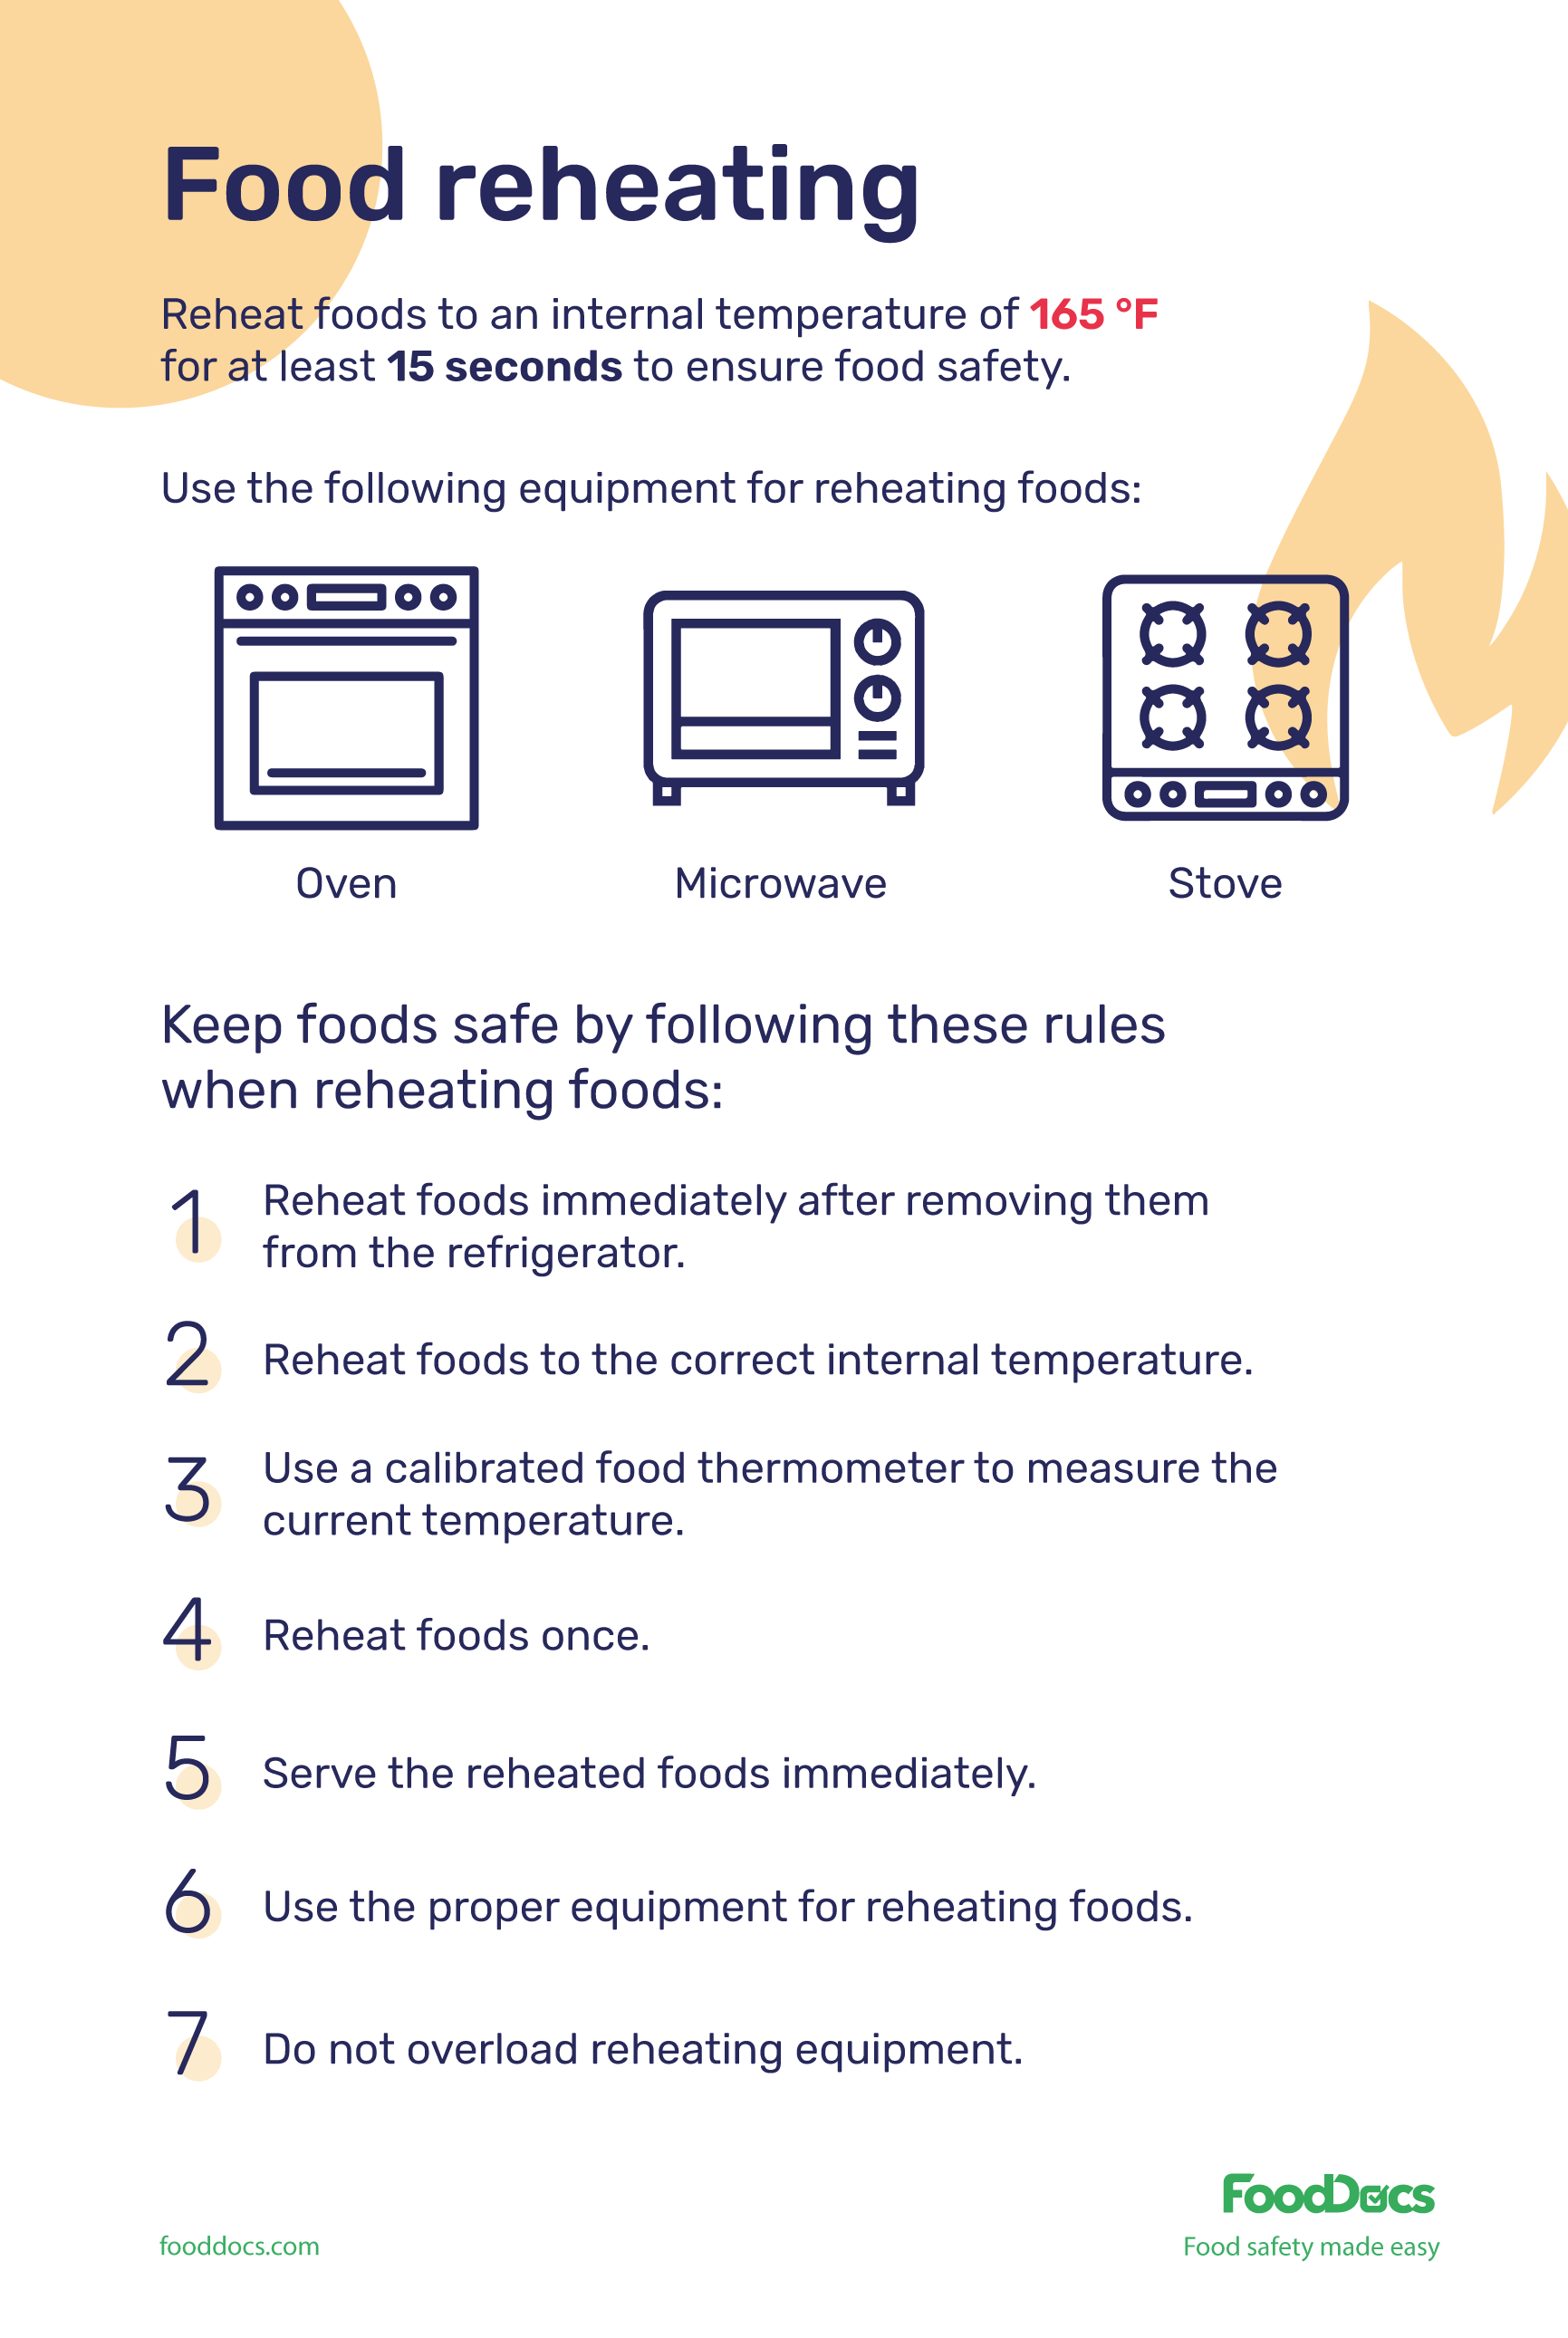 How to Properly Use a Microwave to Reheat Food